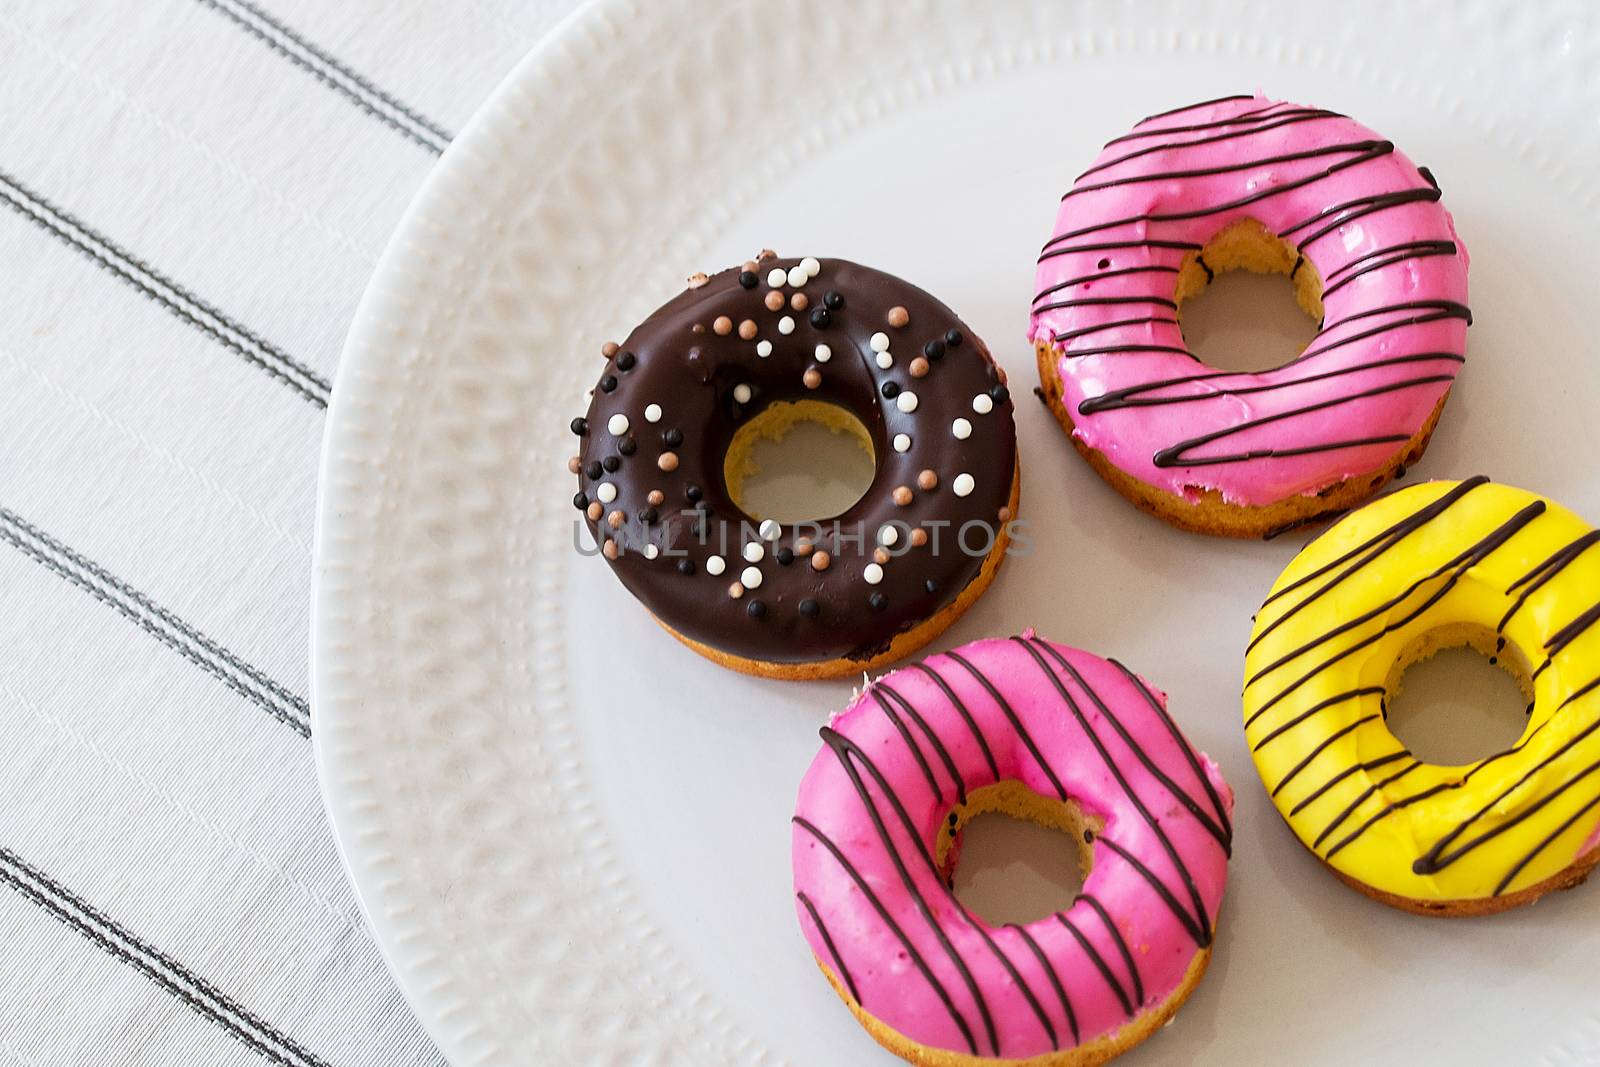 assorted donuts with chocolate frosted, pink glazed and sprinkles donuts by 3KStudio